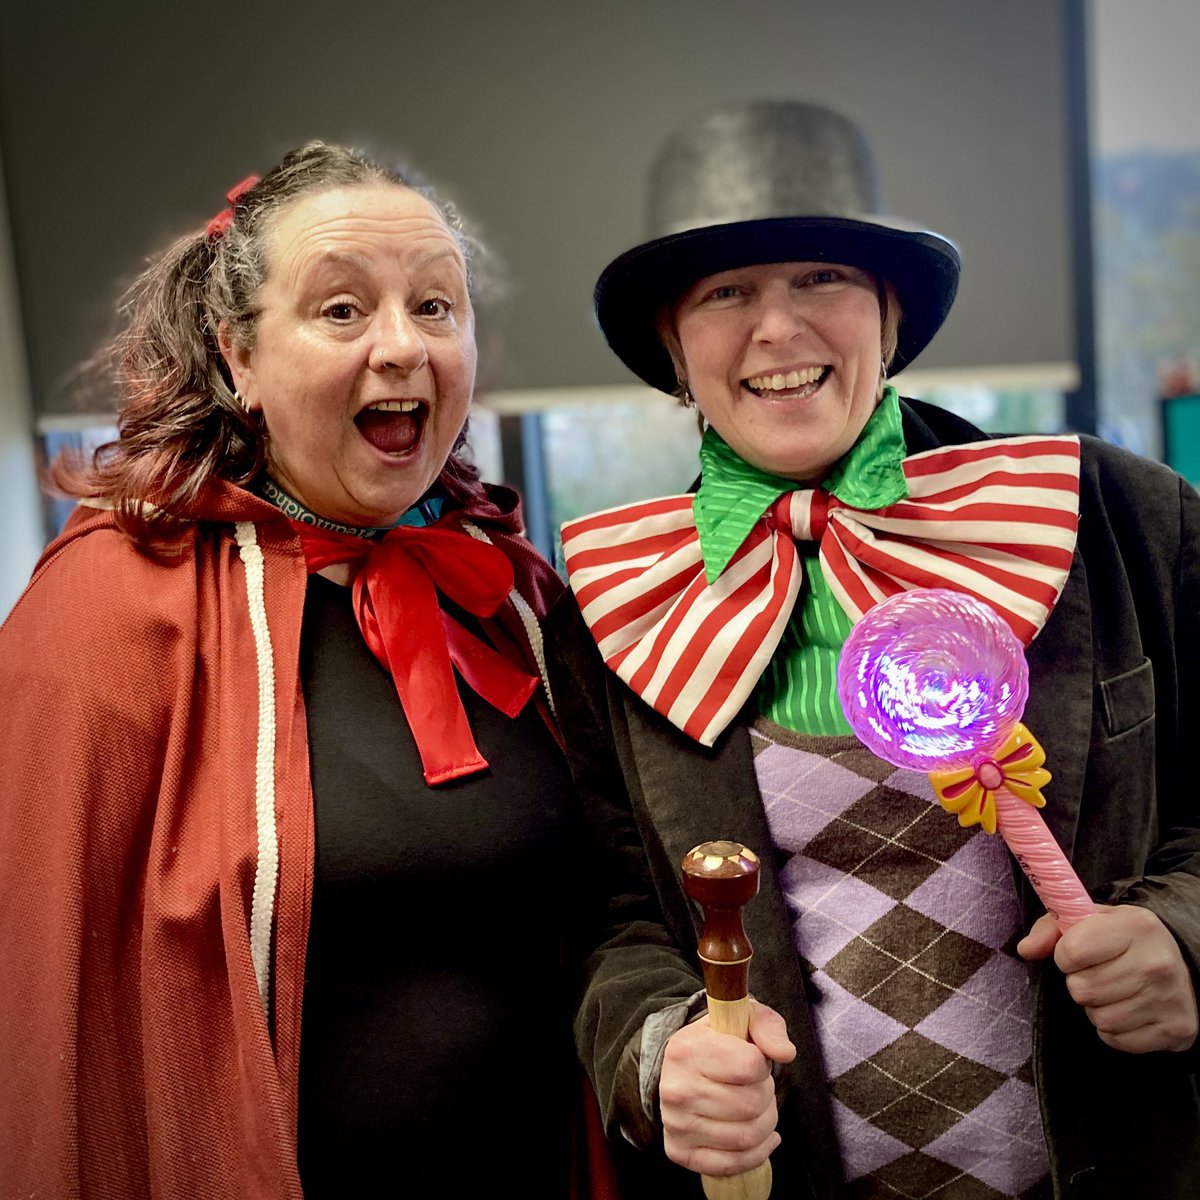 We’ve had lots of fun costuming our friends @OldhamLibraries and @GalleryOldham for World Book Day #wbd2024